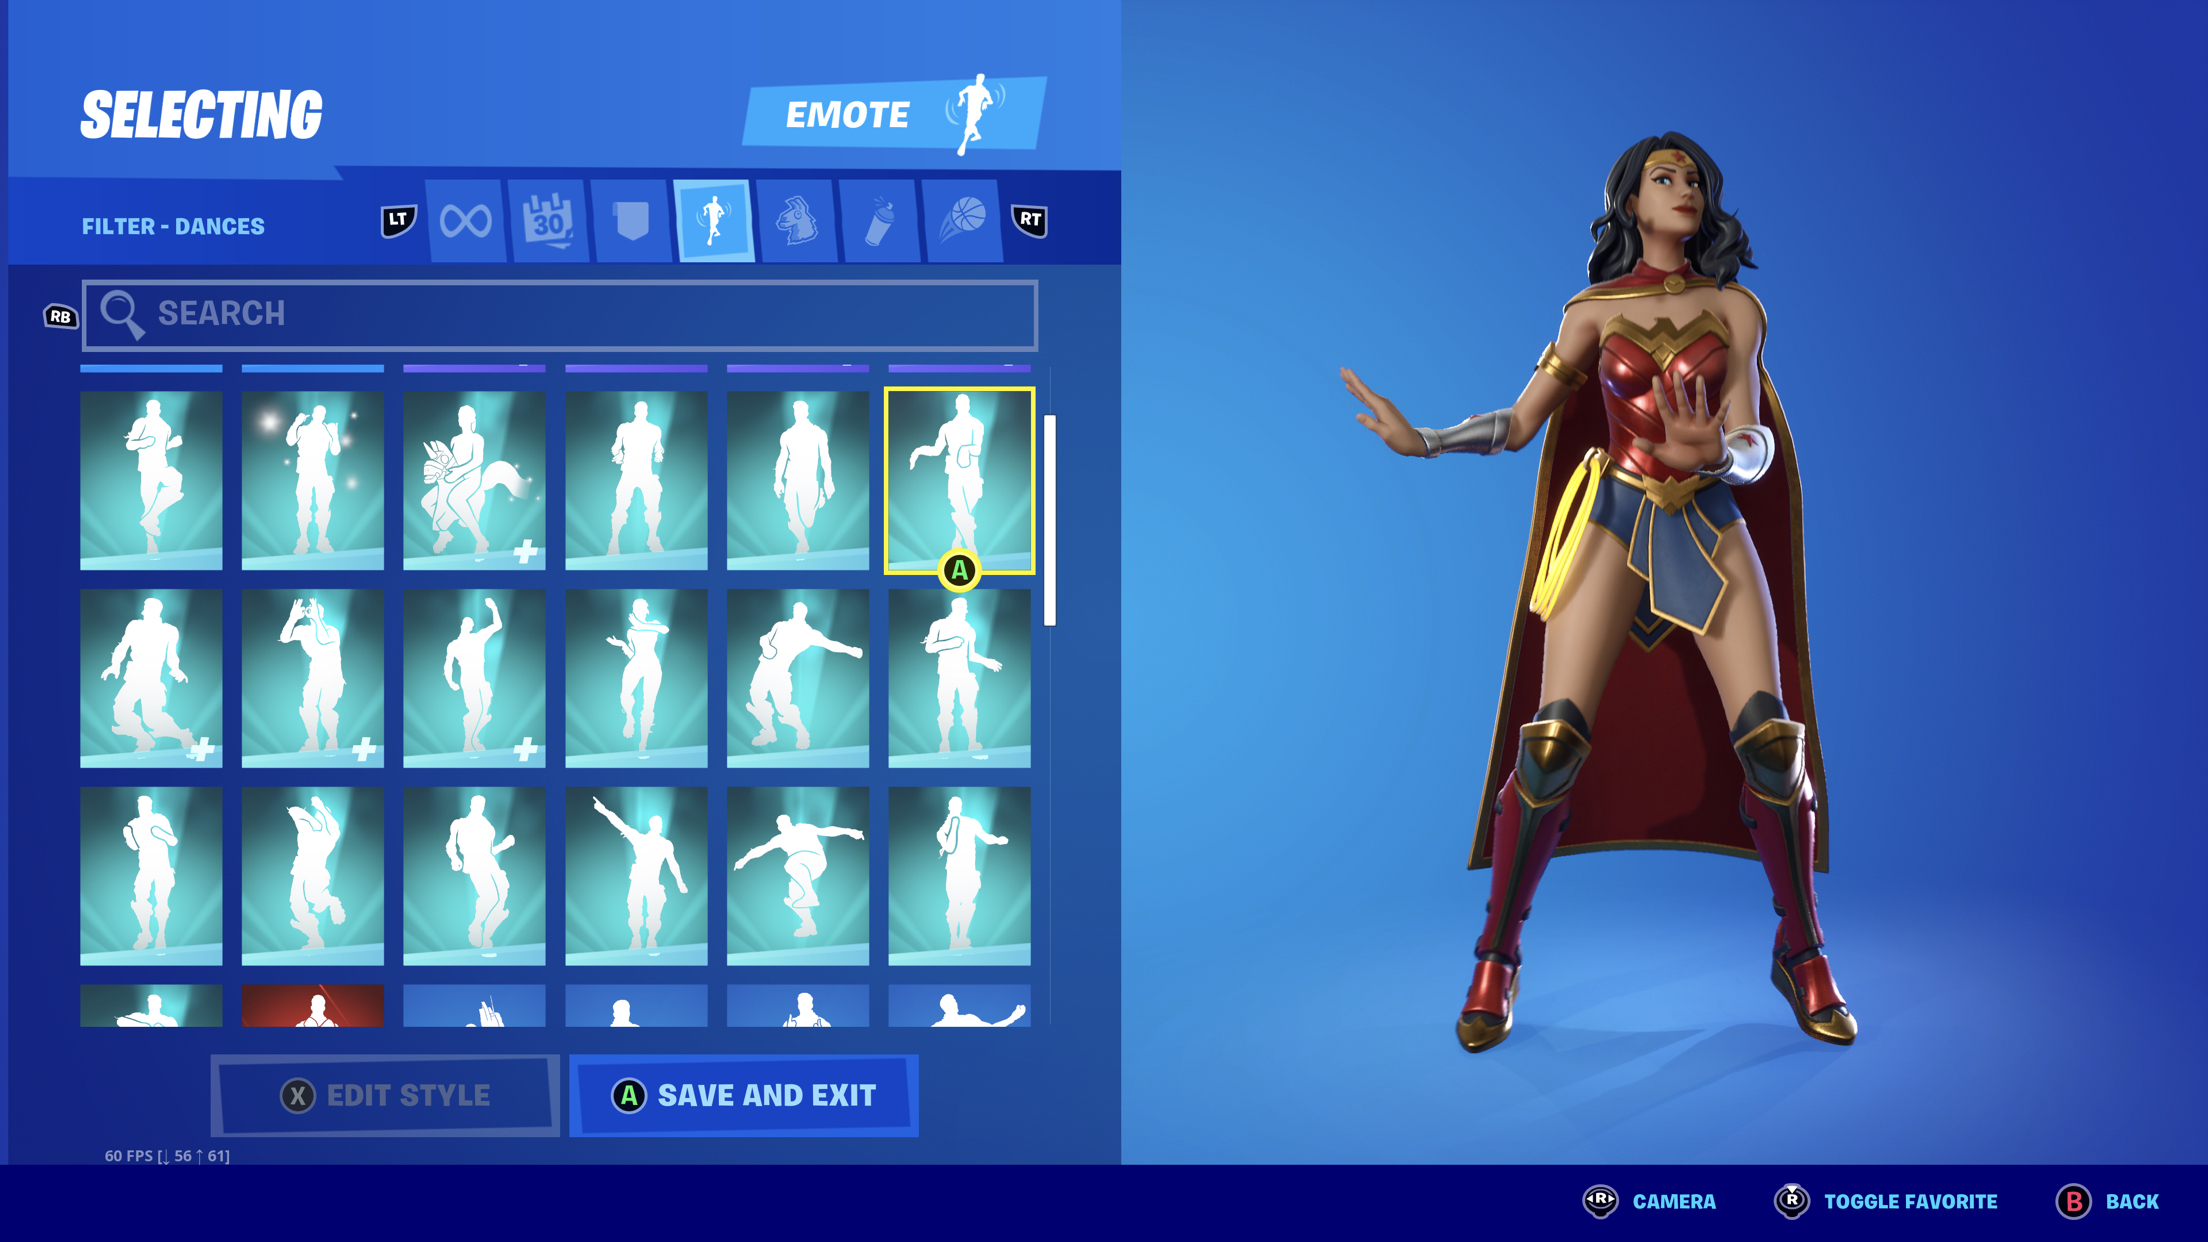 Icon Series emotes are among the most expensive, but also the most sought after in Fortnite.